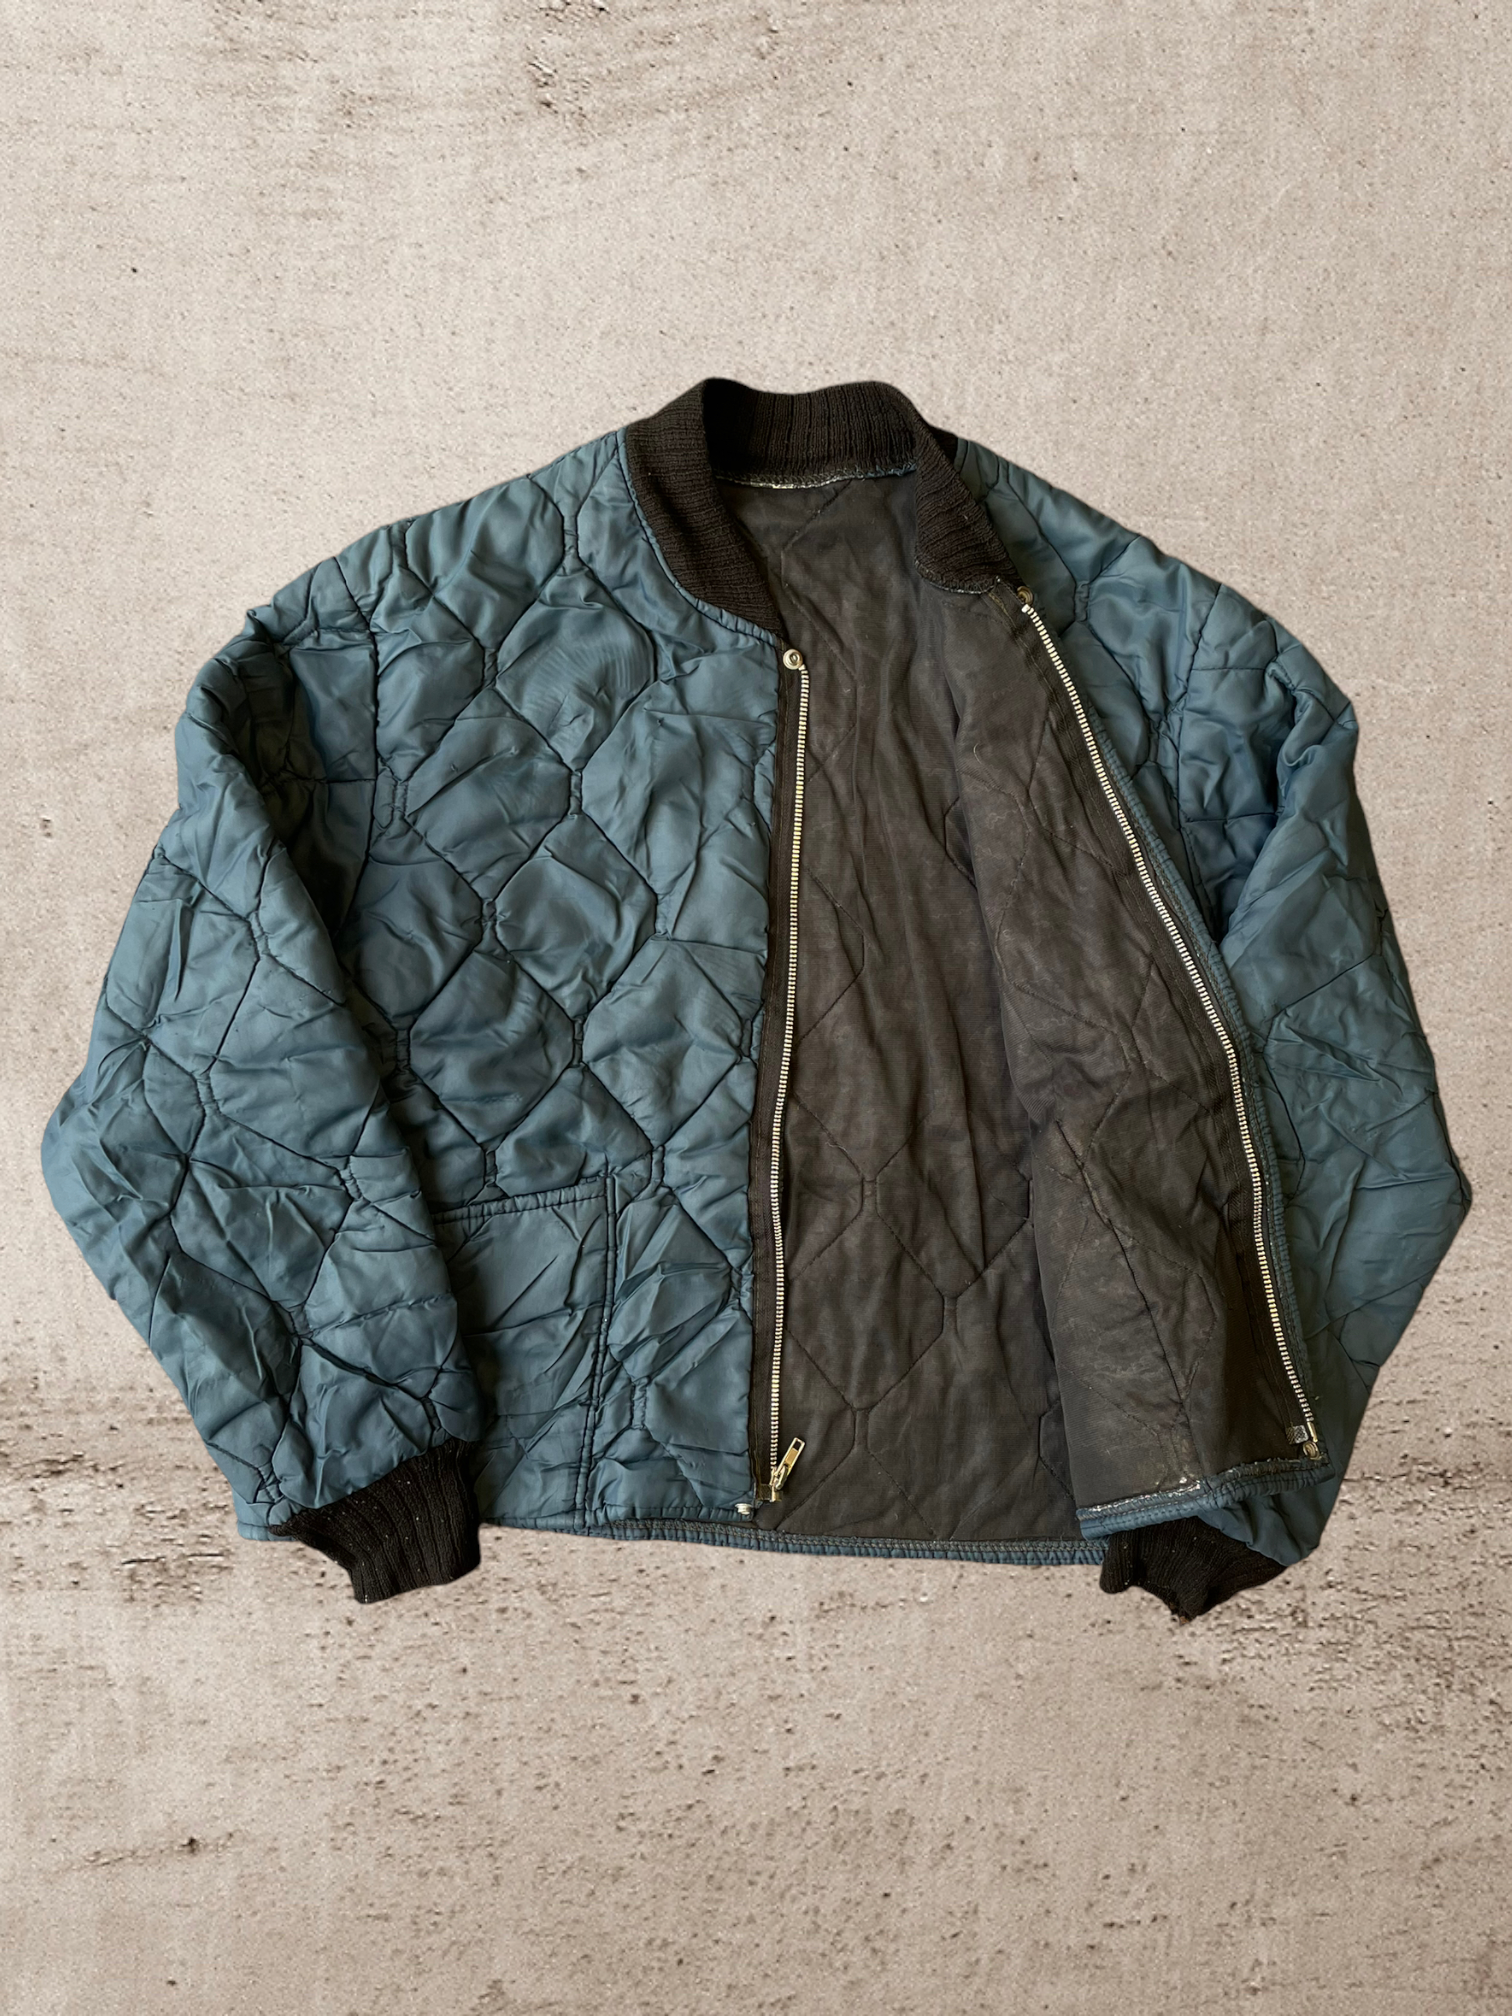 90s Quilted Bomber Jacket - Medium